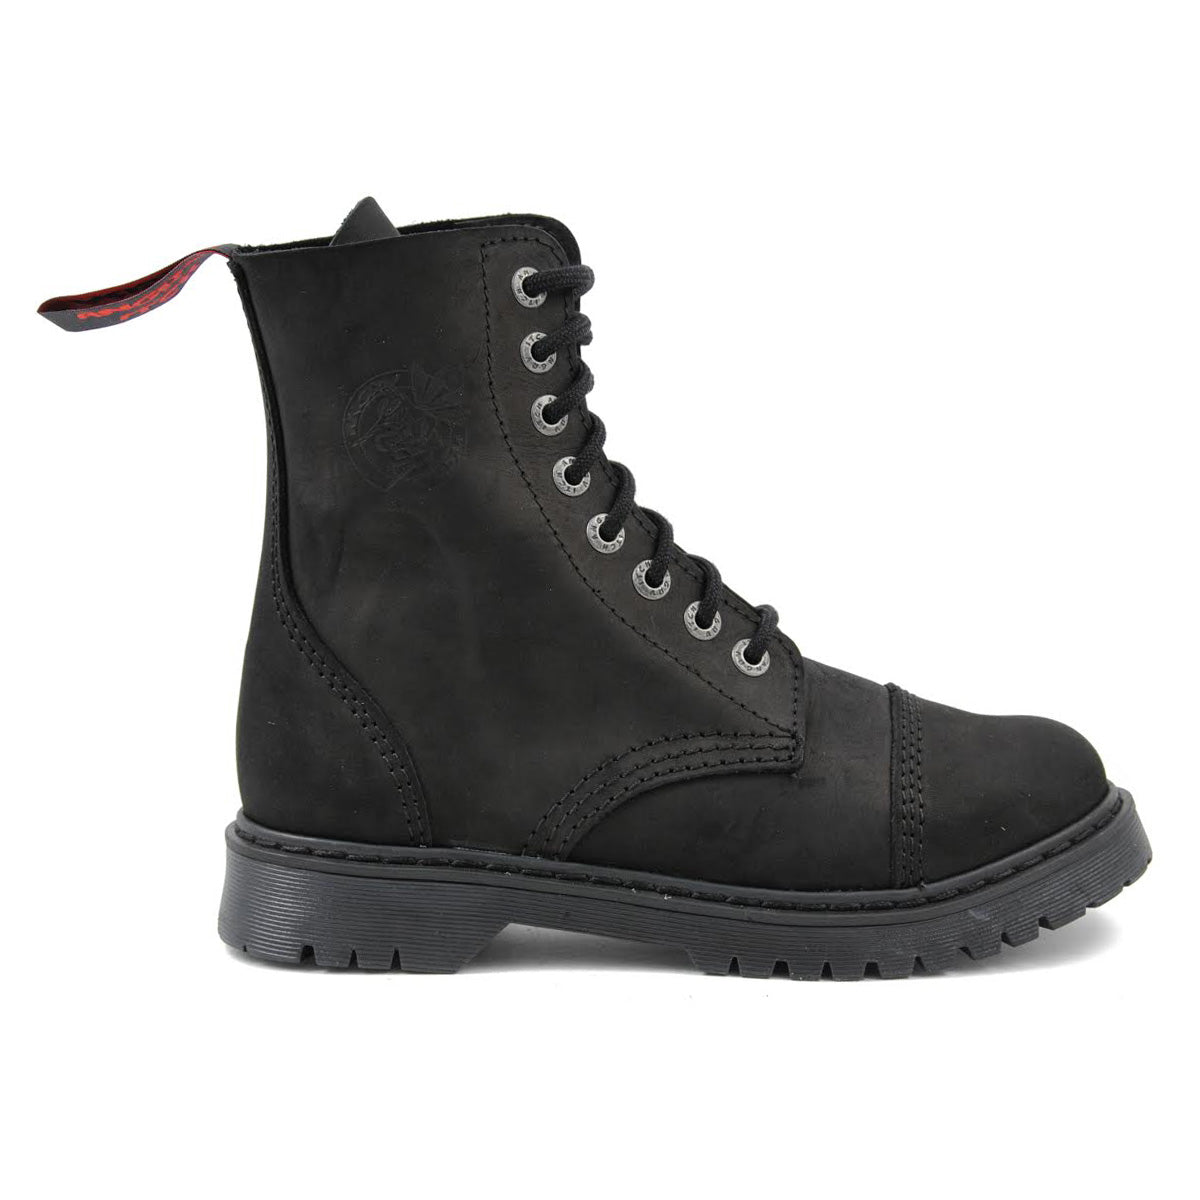 Angry Itch 8 Eyelet Combat Boots Vintage Black Leather Air Cushion Sole